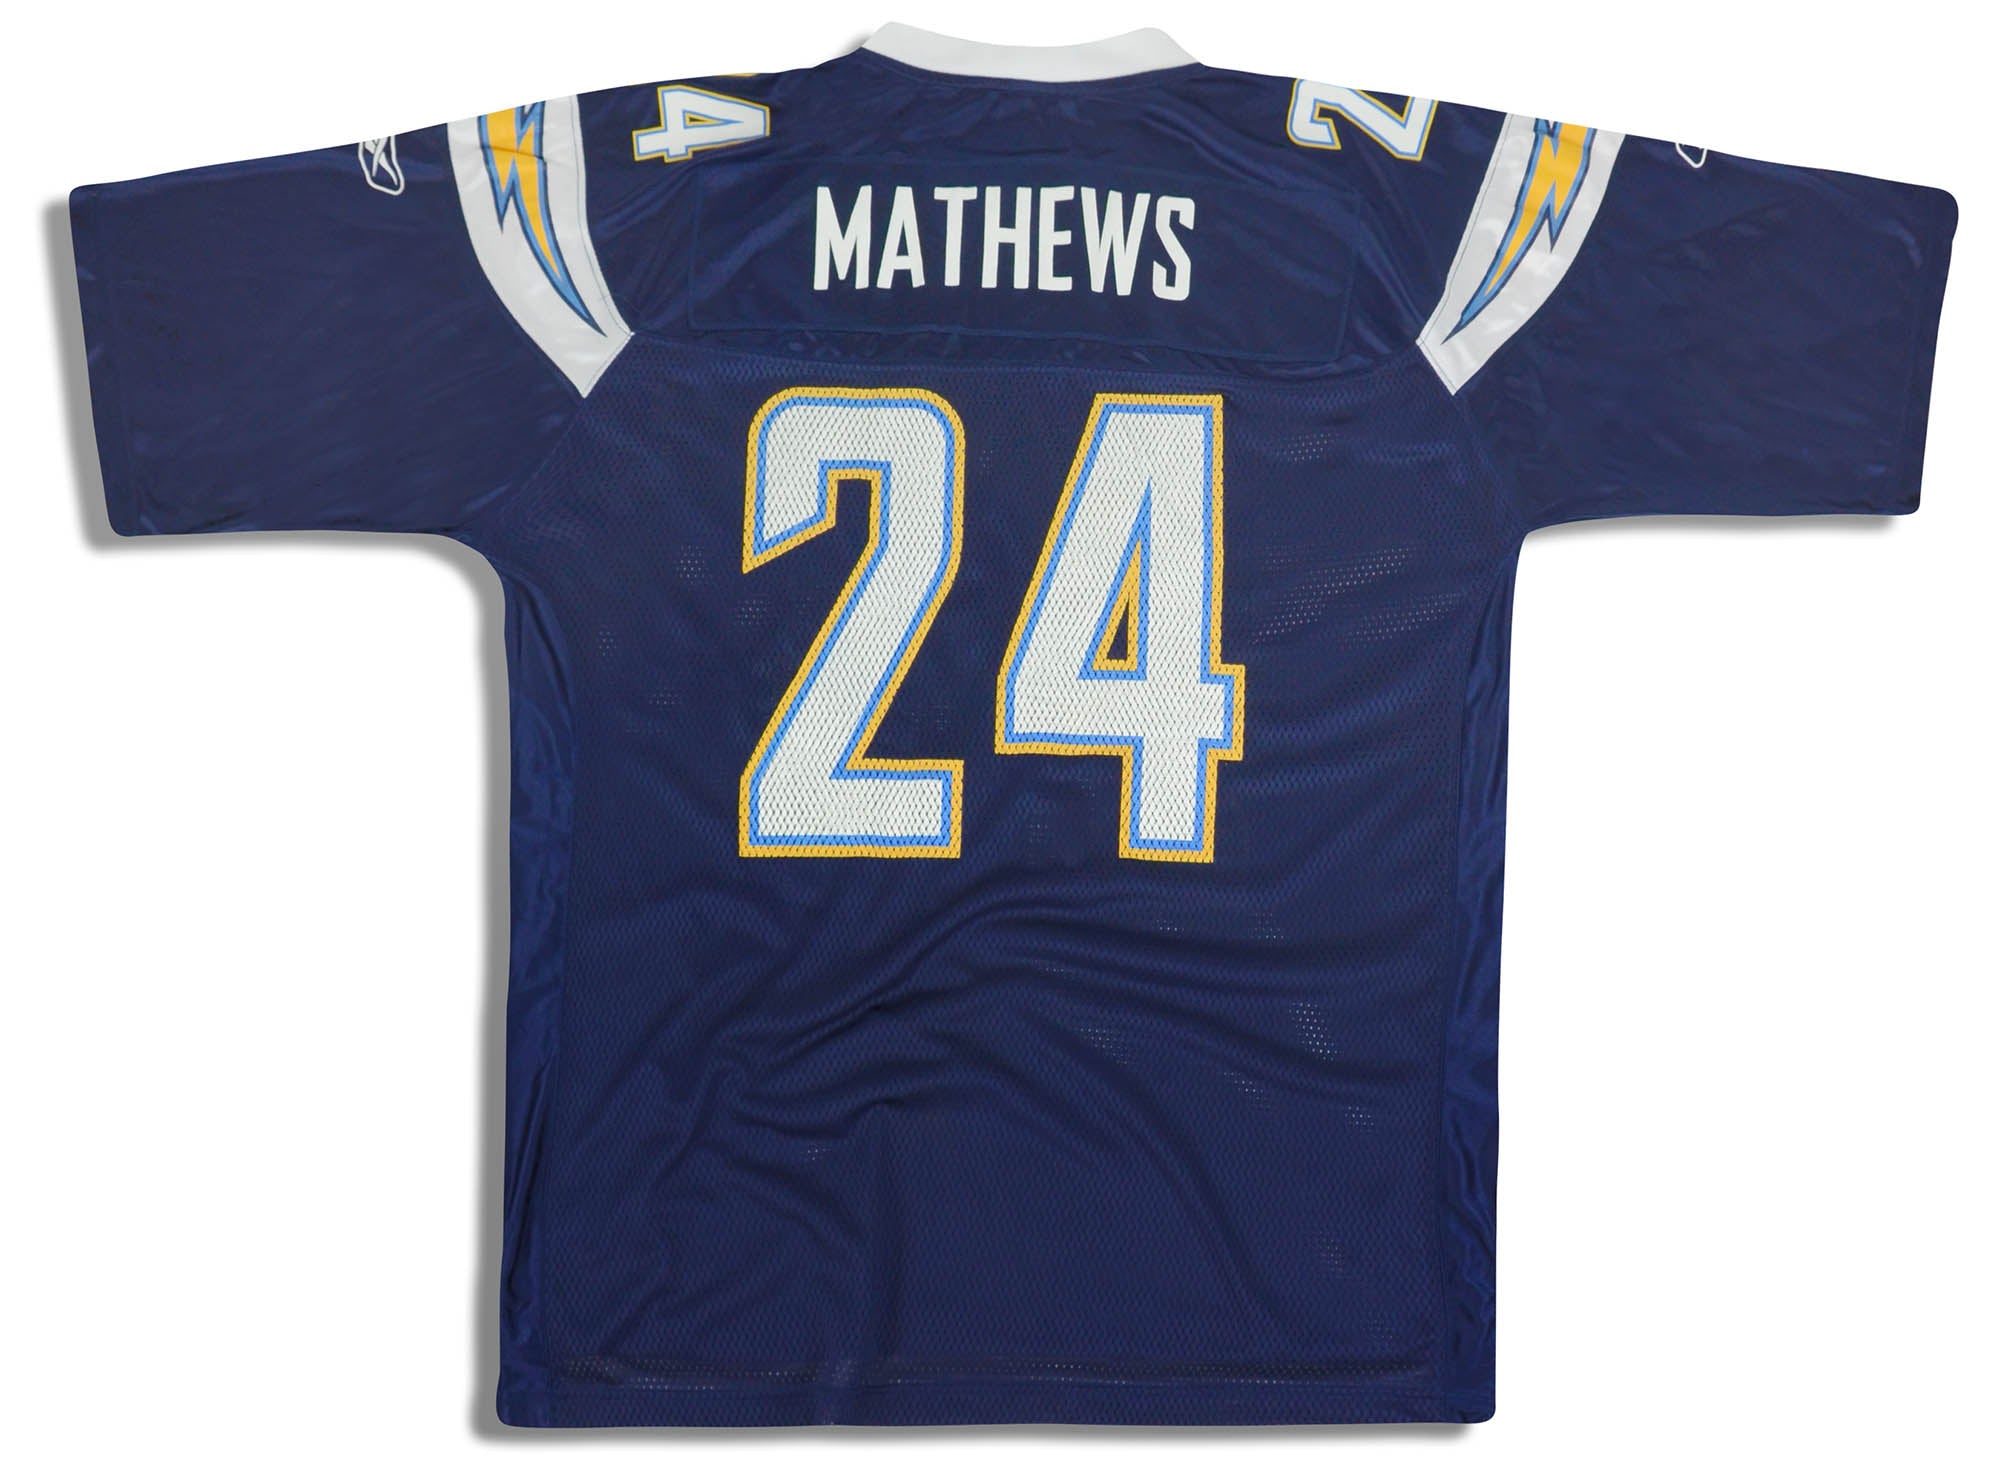 2010-11 SAN DIEGO CHARGERS MATHEWS #24 REEBOK ON FIELD JERSEY (HOME) L -  Classic American Sports